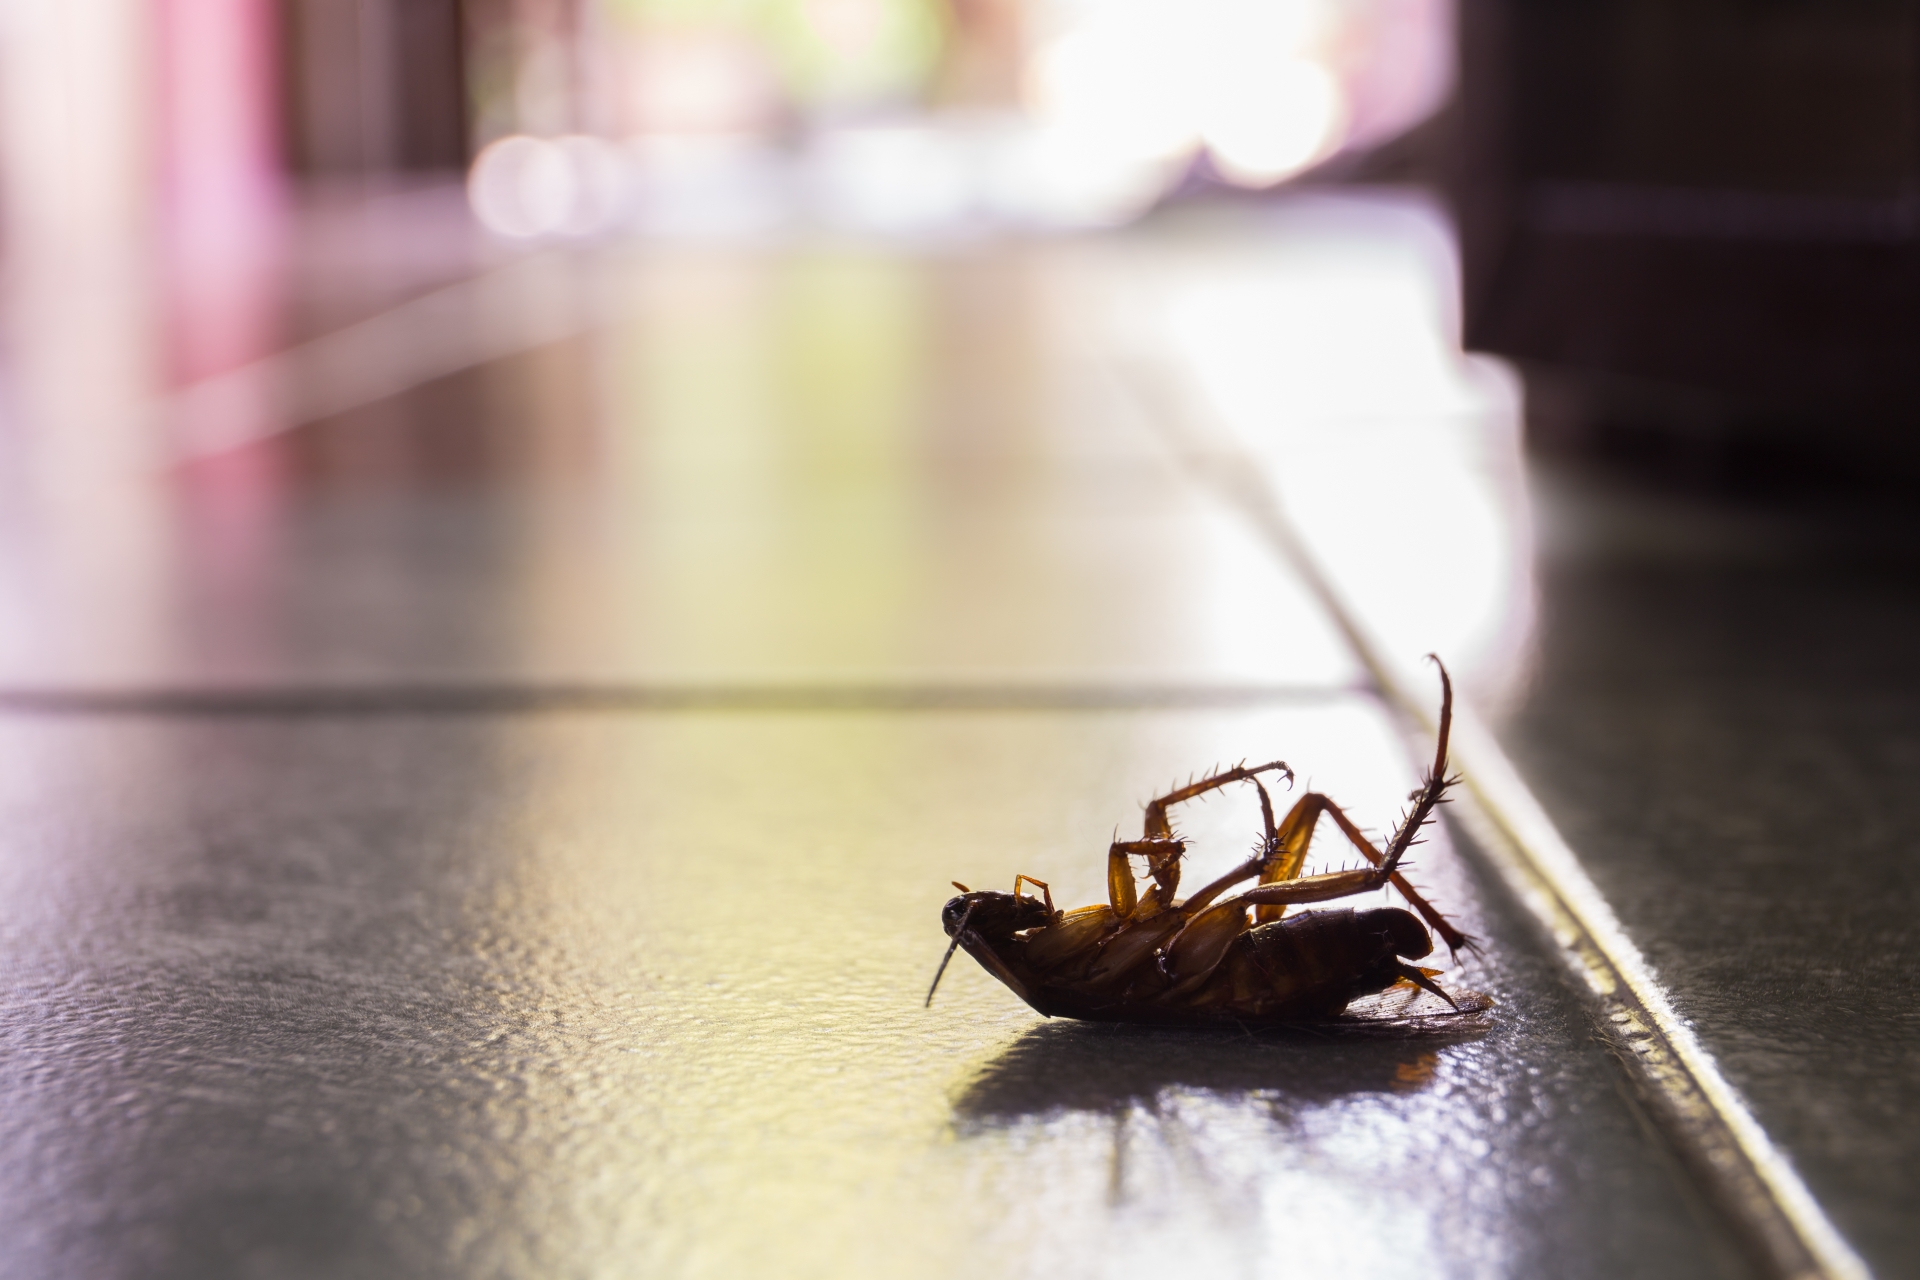 Cockroach Control, Pest Control in Mortlake, SW14. Call Now 020 8166 9746